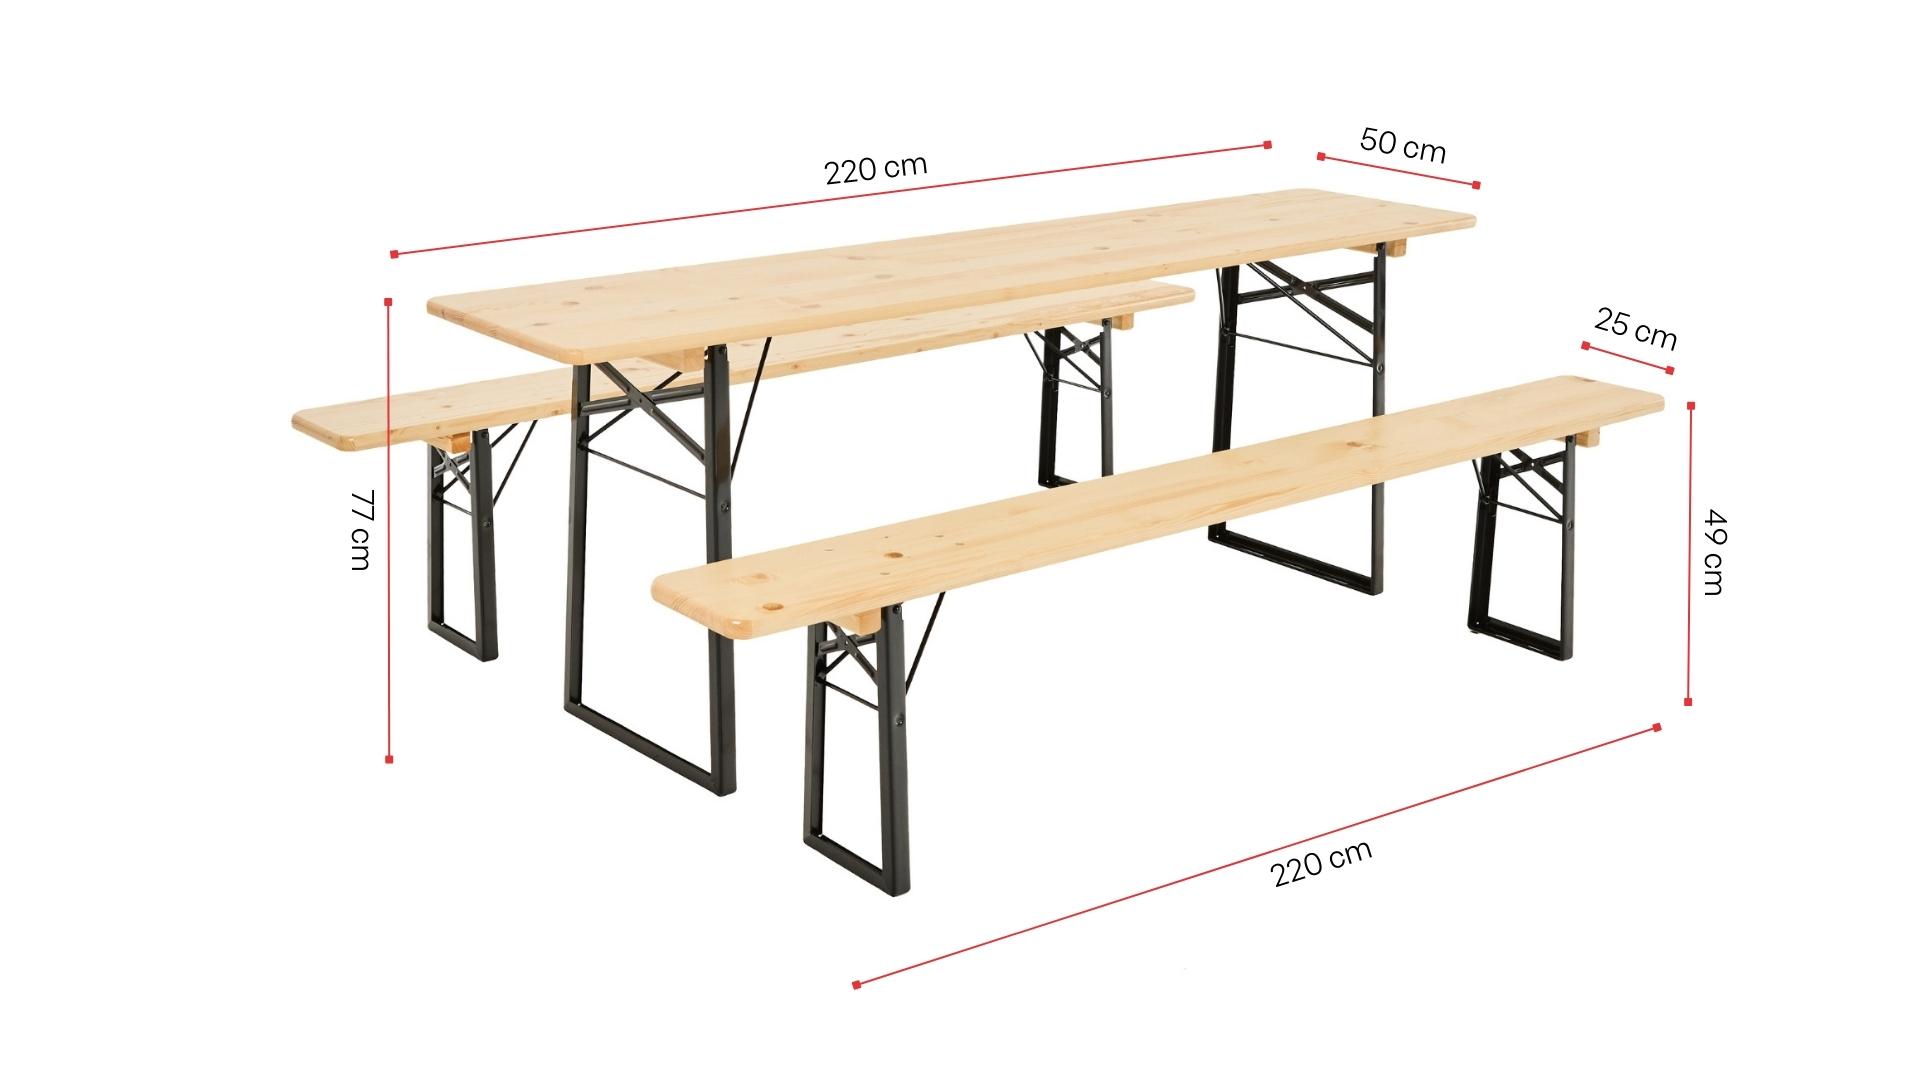 A classic beer garden table sets in nature is shown with its dimensions.